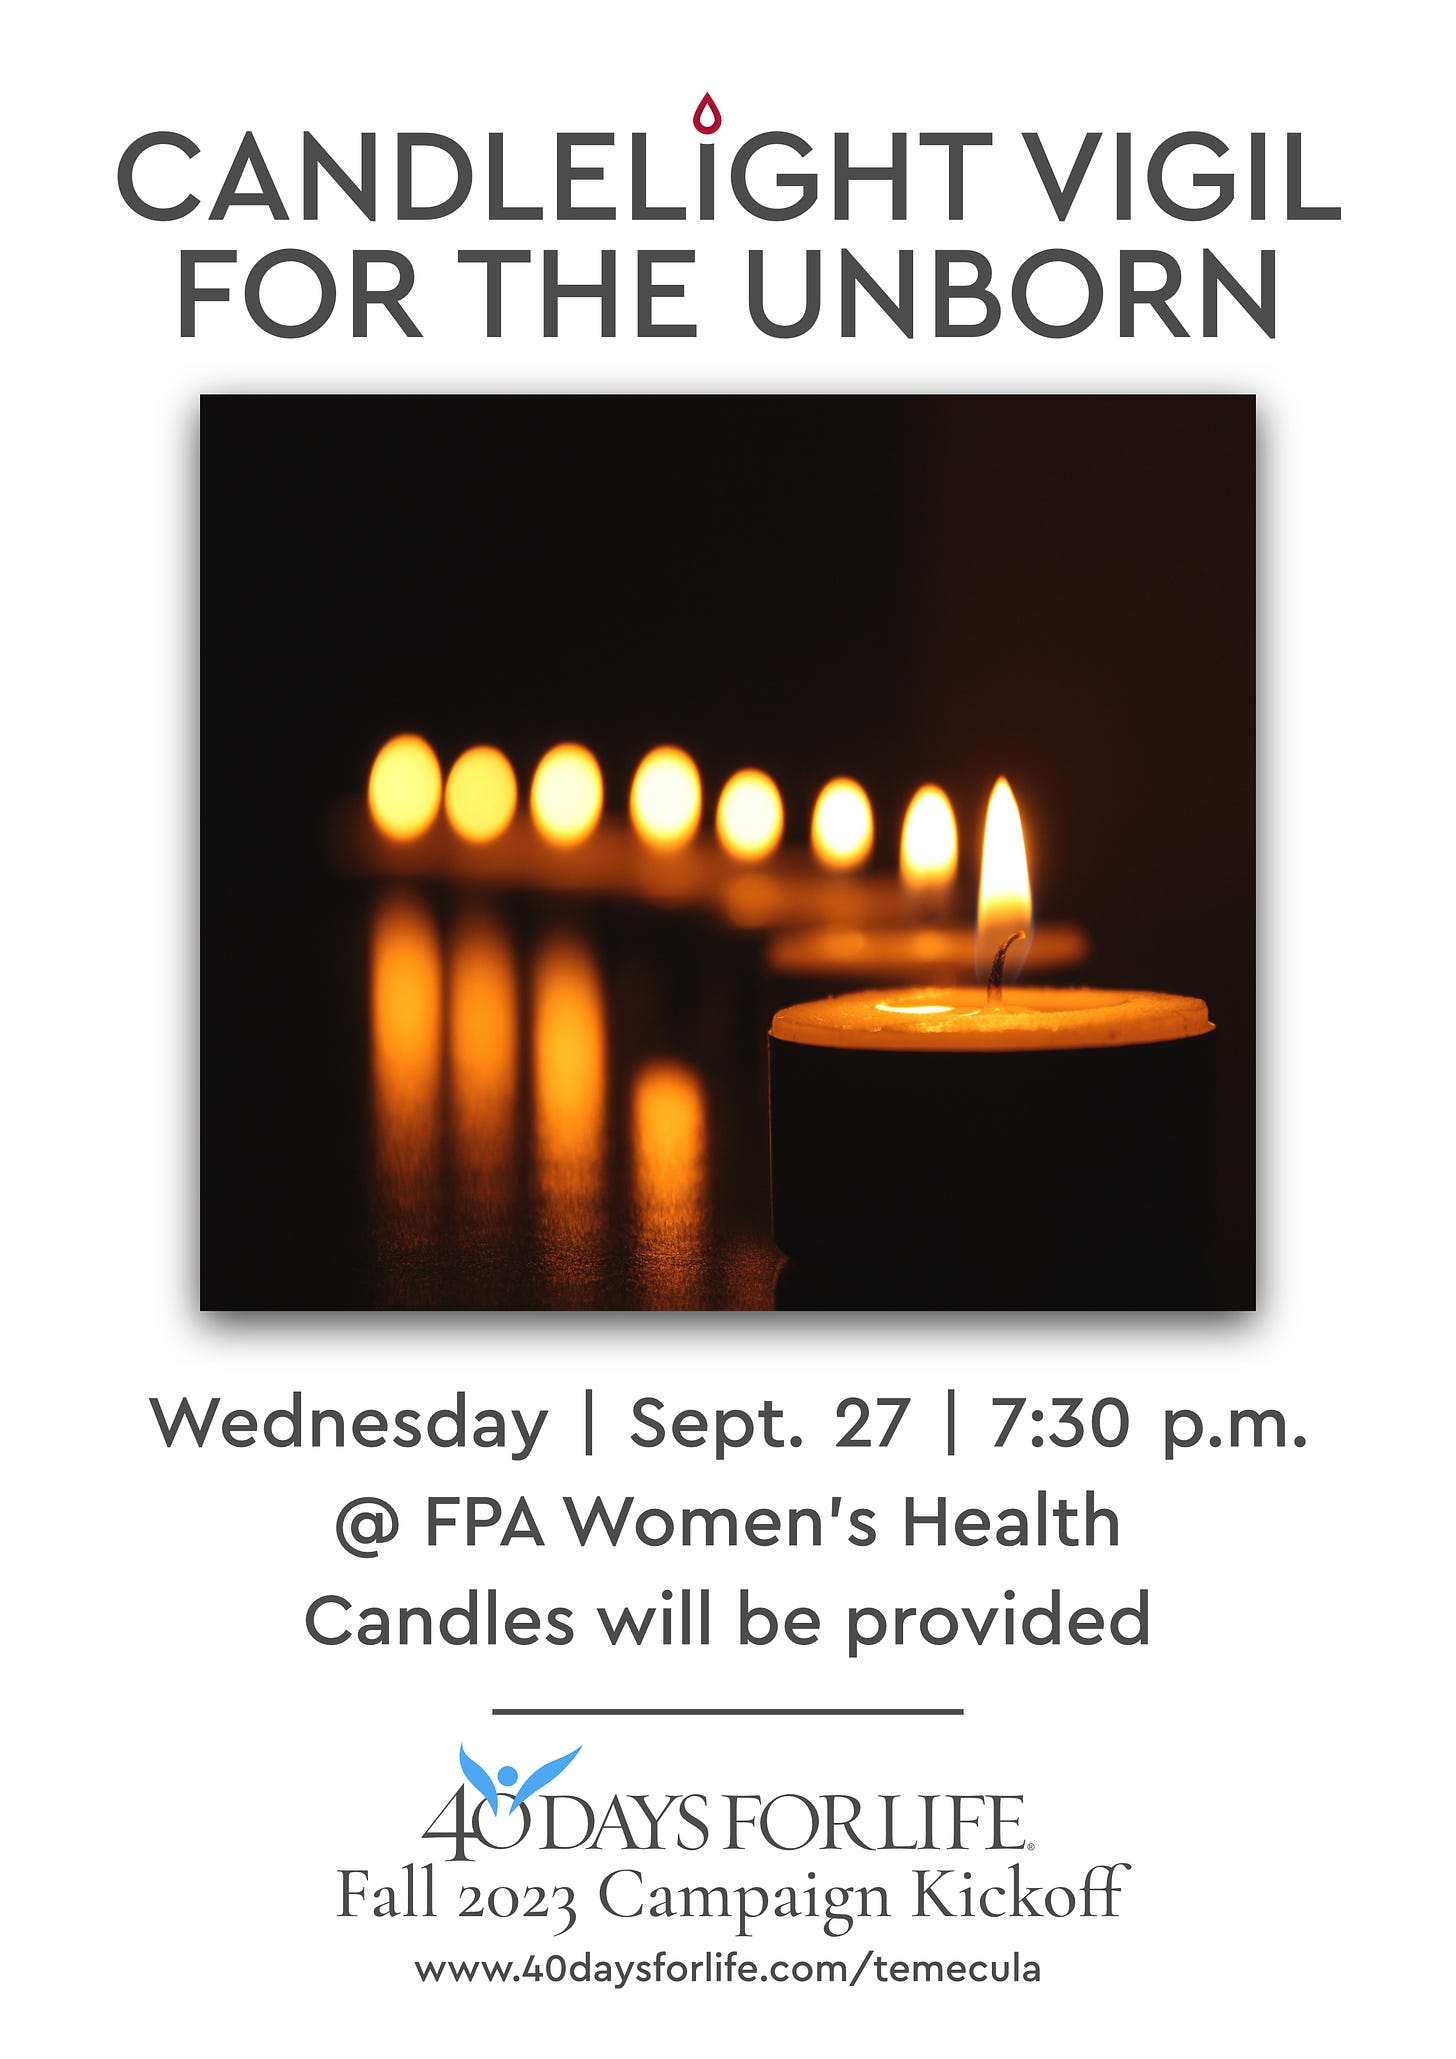 Candlelight vigil for the unborn, September 27 @ FPA Women's Health. 2023 40 Days for Life Temecula kickoff event.